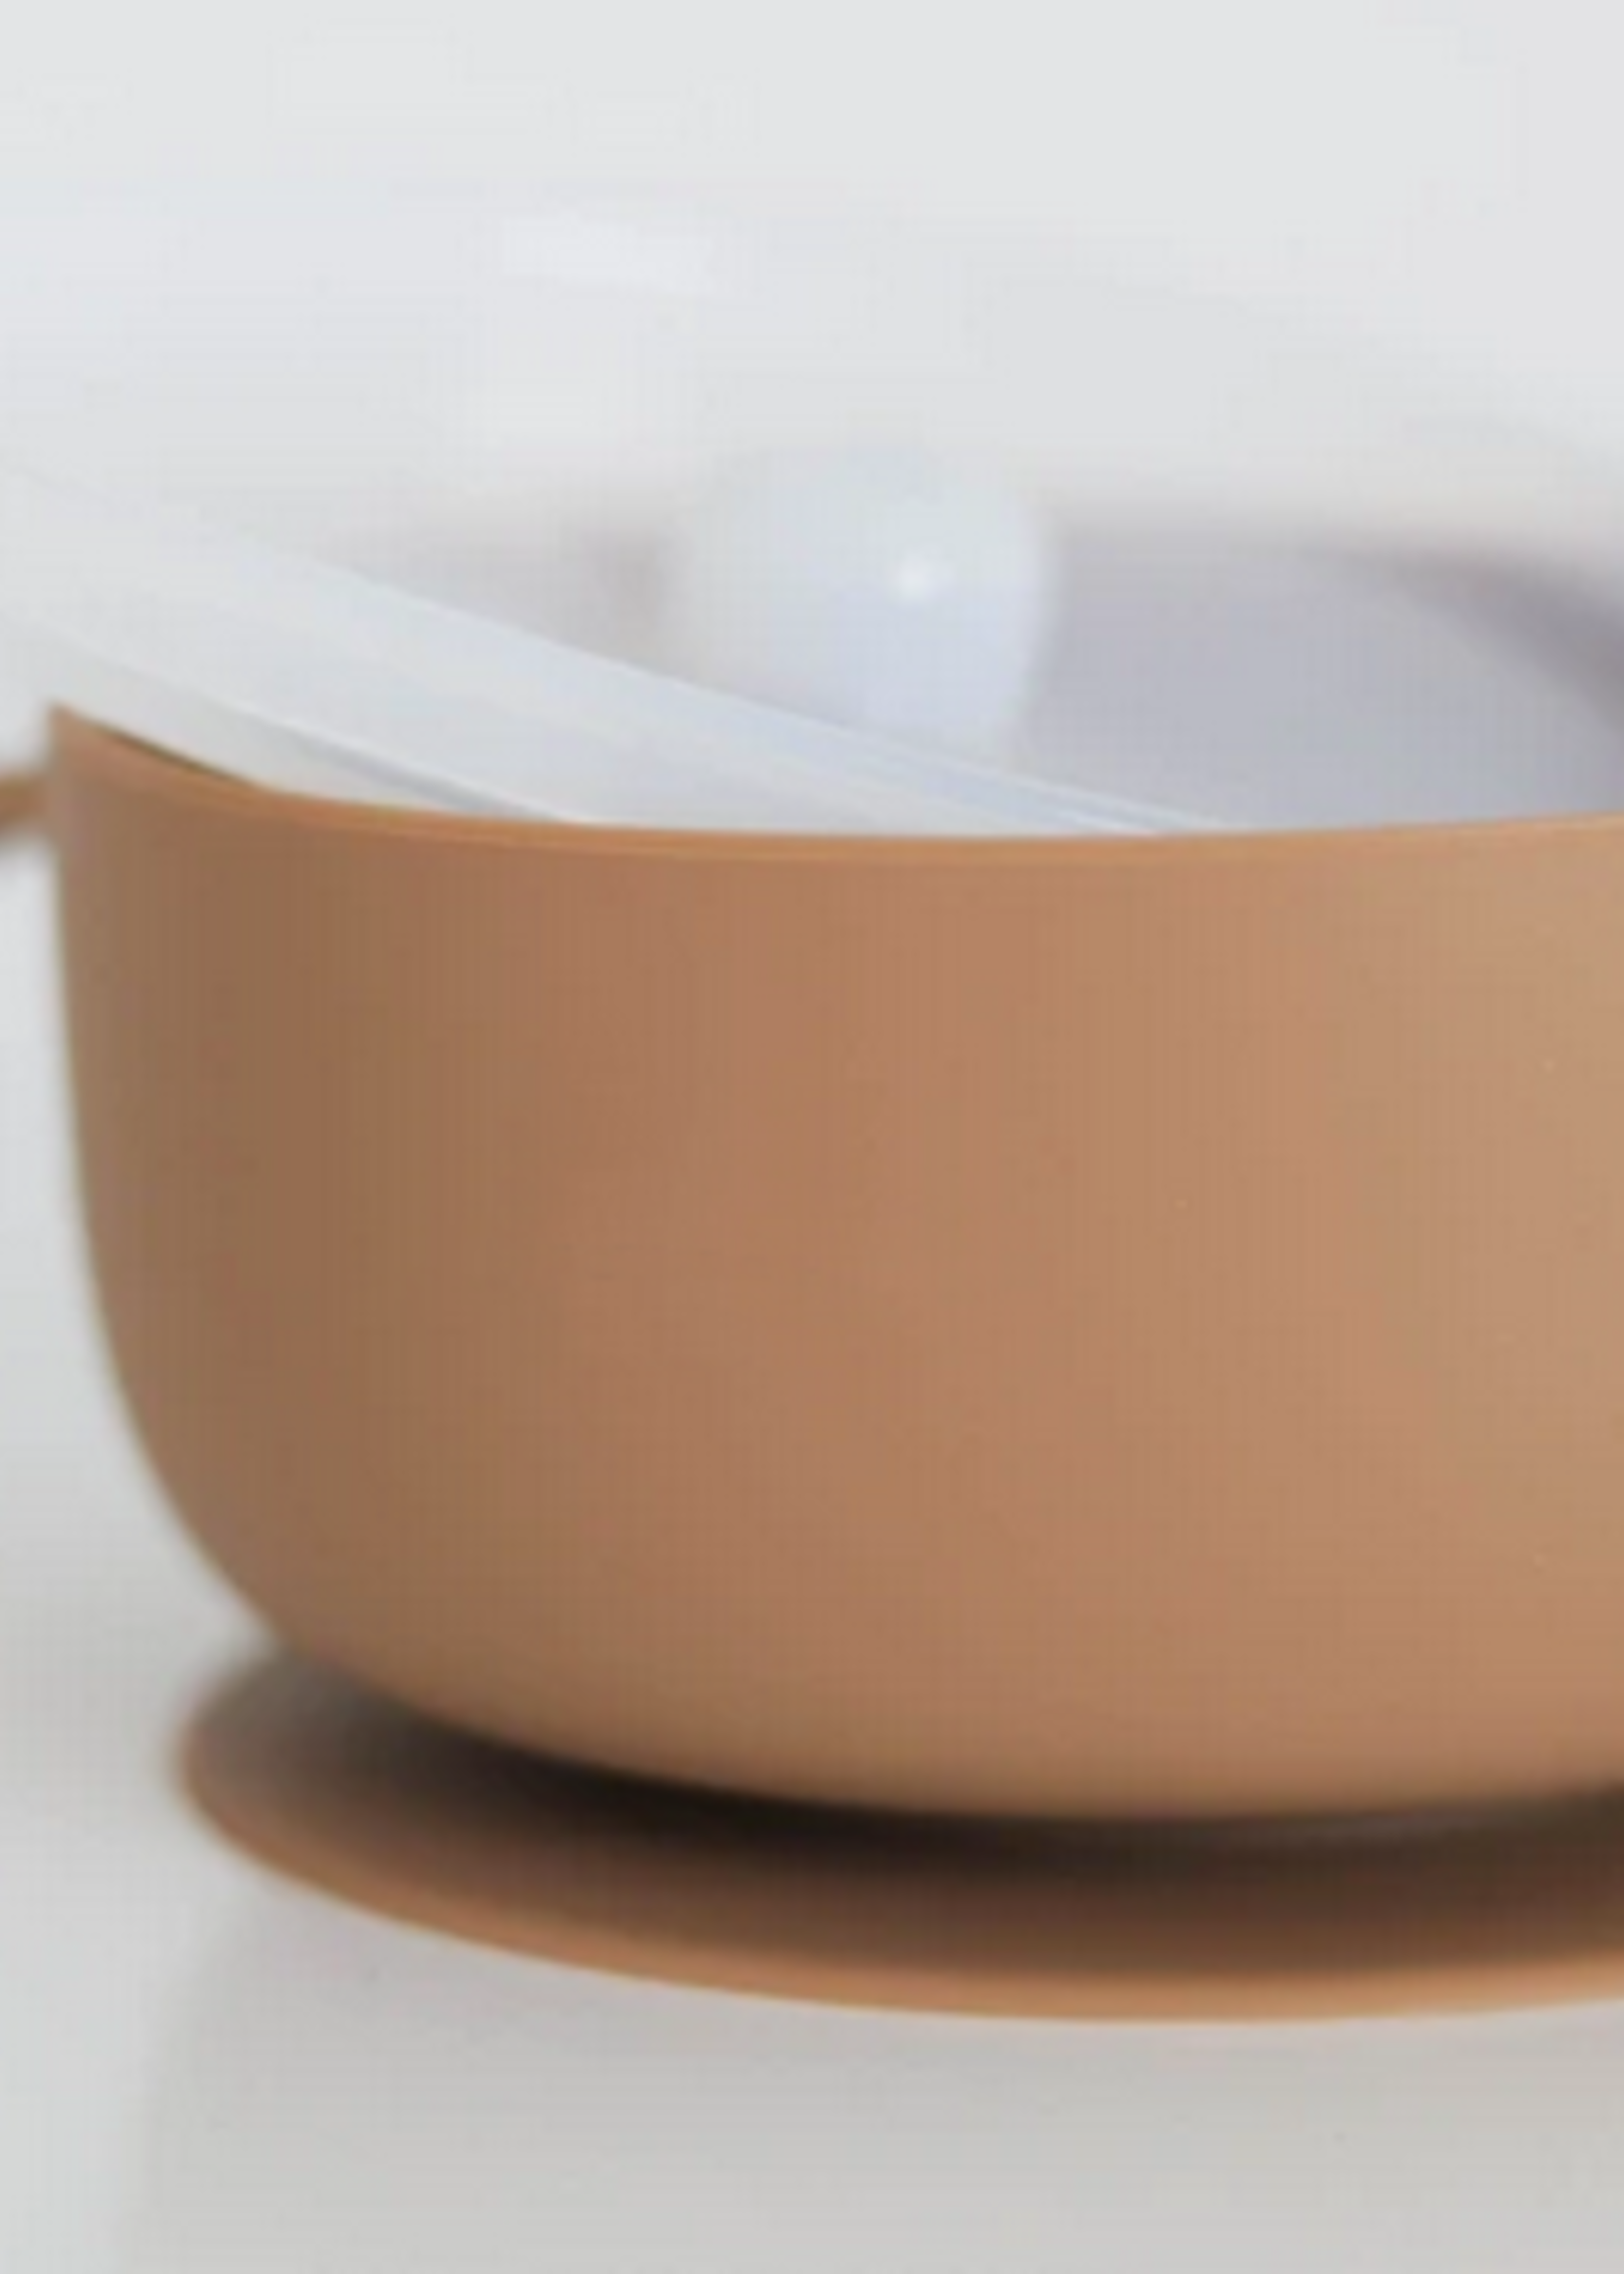 Elitaire Petite Coco Suction Bowl with Lid